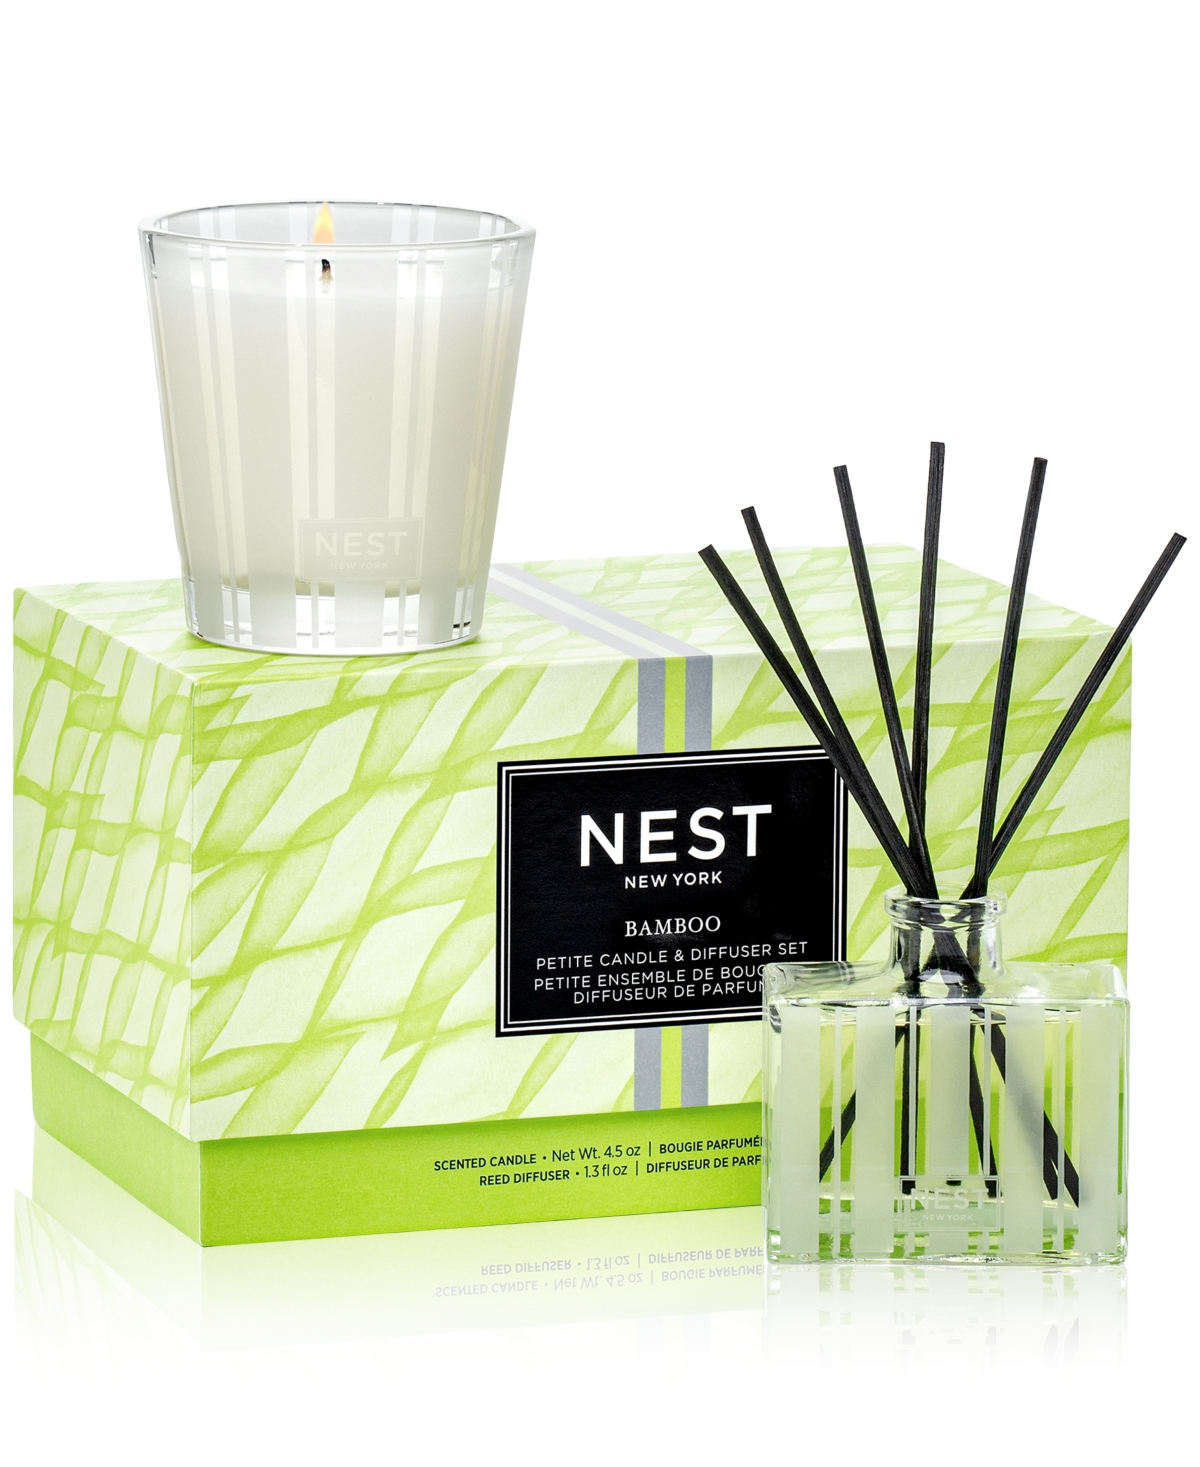 2-Pc. Bamboo Petite Candle & Diffuser Set